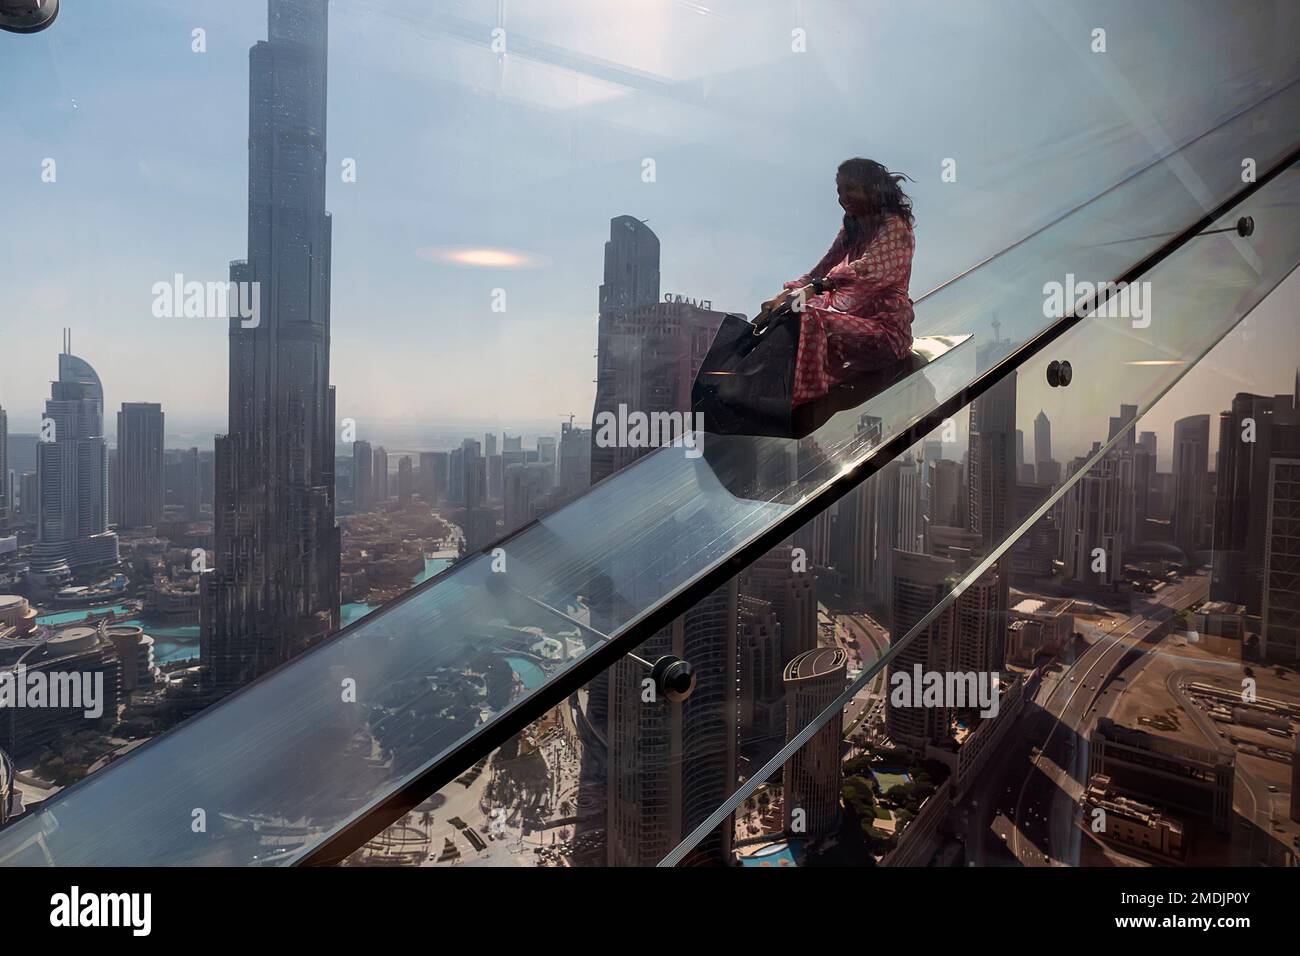 Dubai, UAE , United Arab Emirates. November 28th, 2022. tourists roll down a glass slide on the Sky View skyscraper. Dangerous scary attraction. Stock Photo